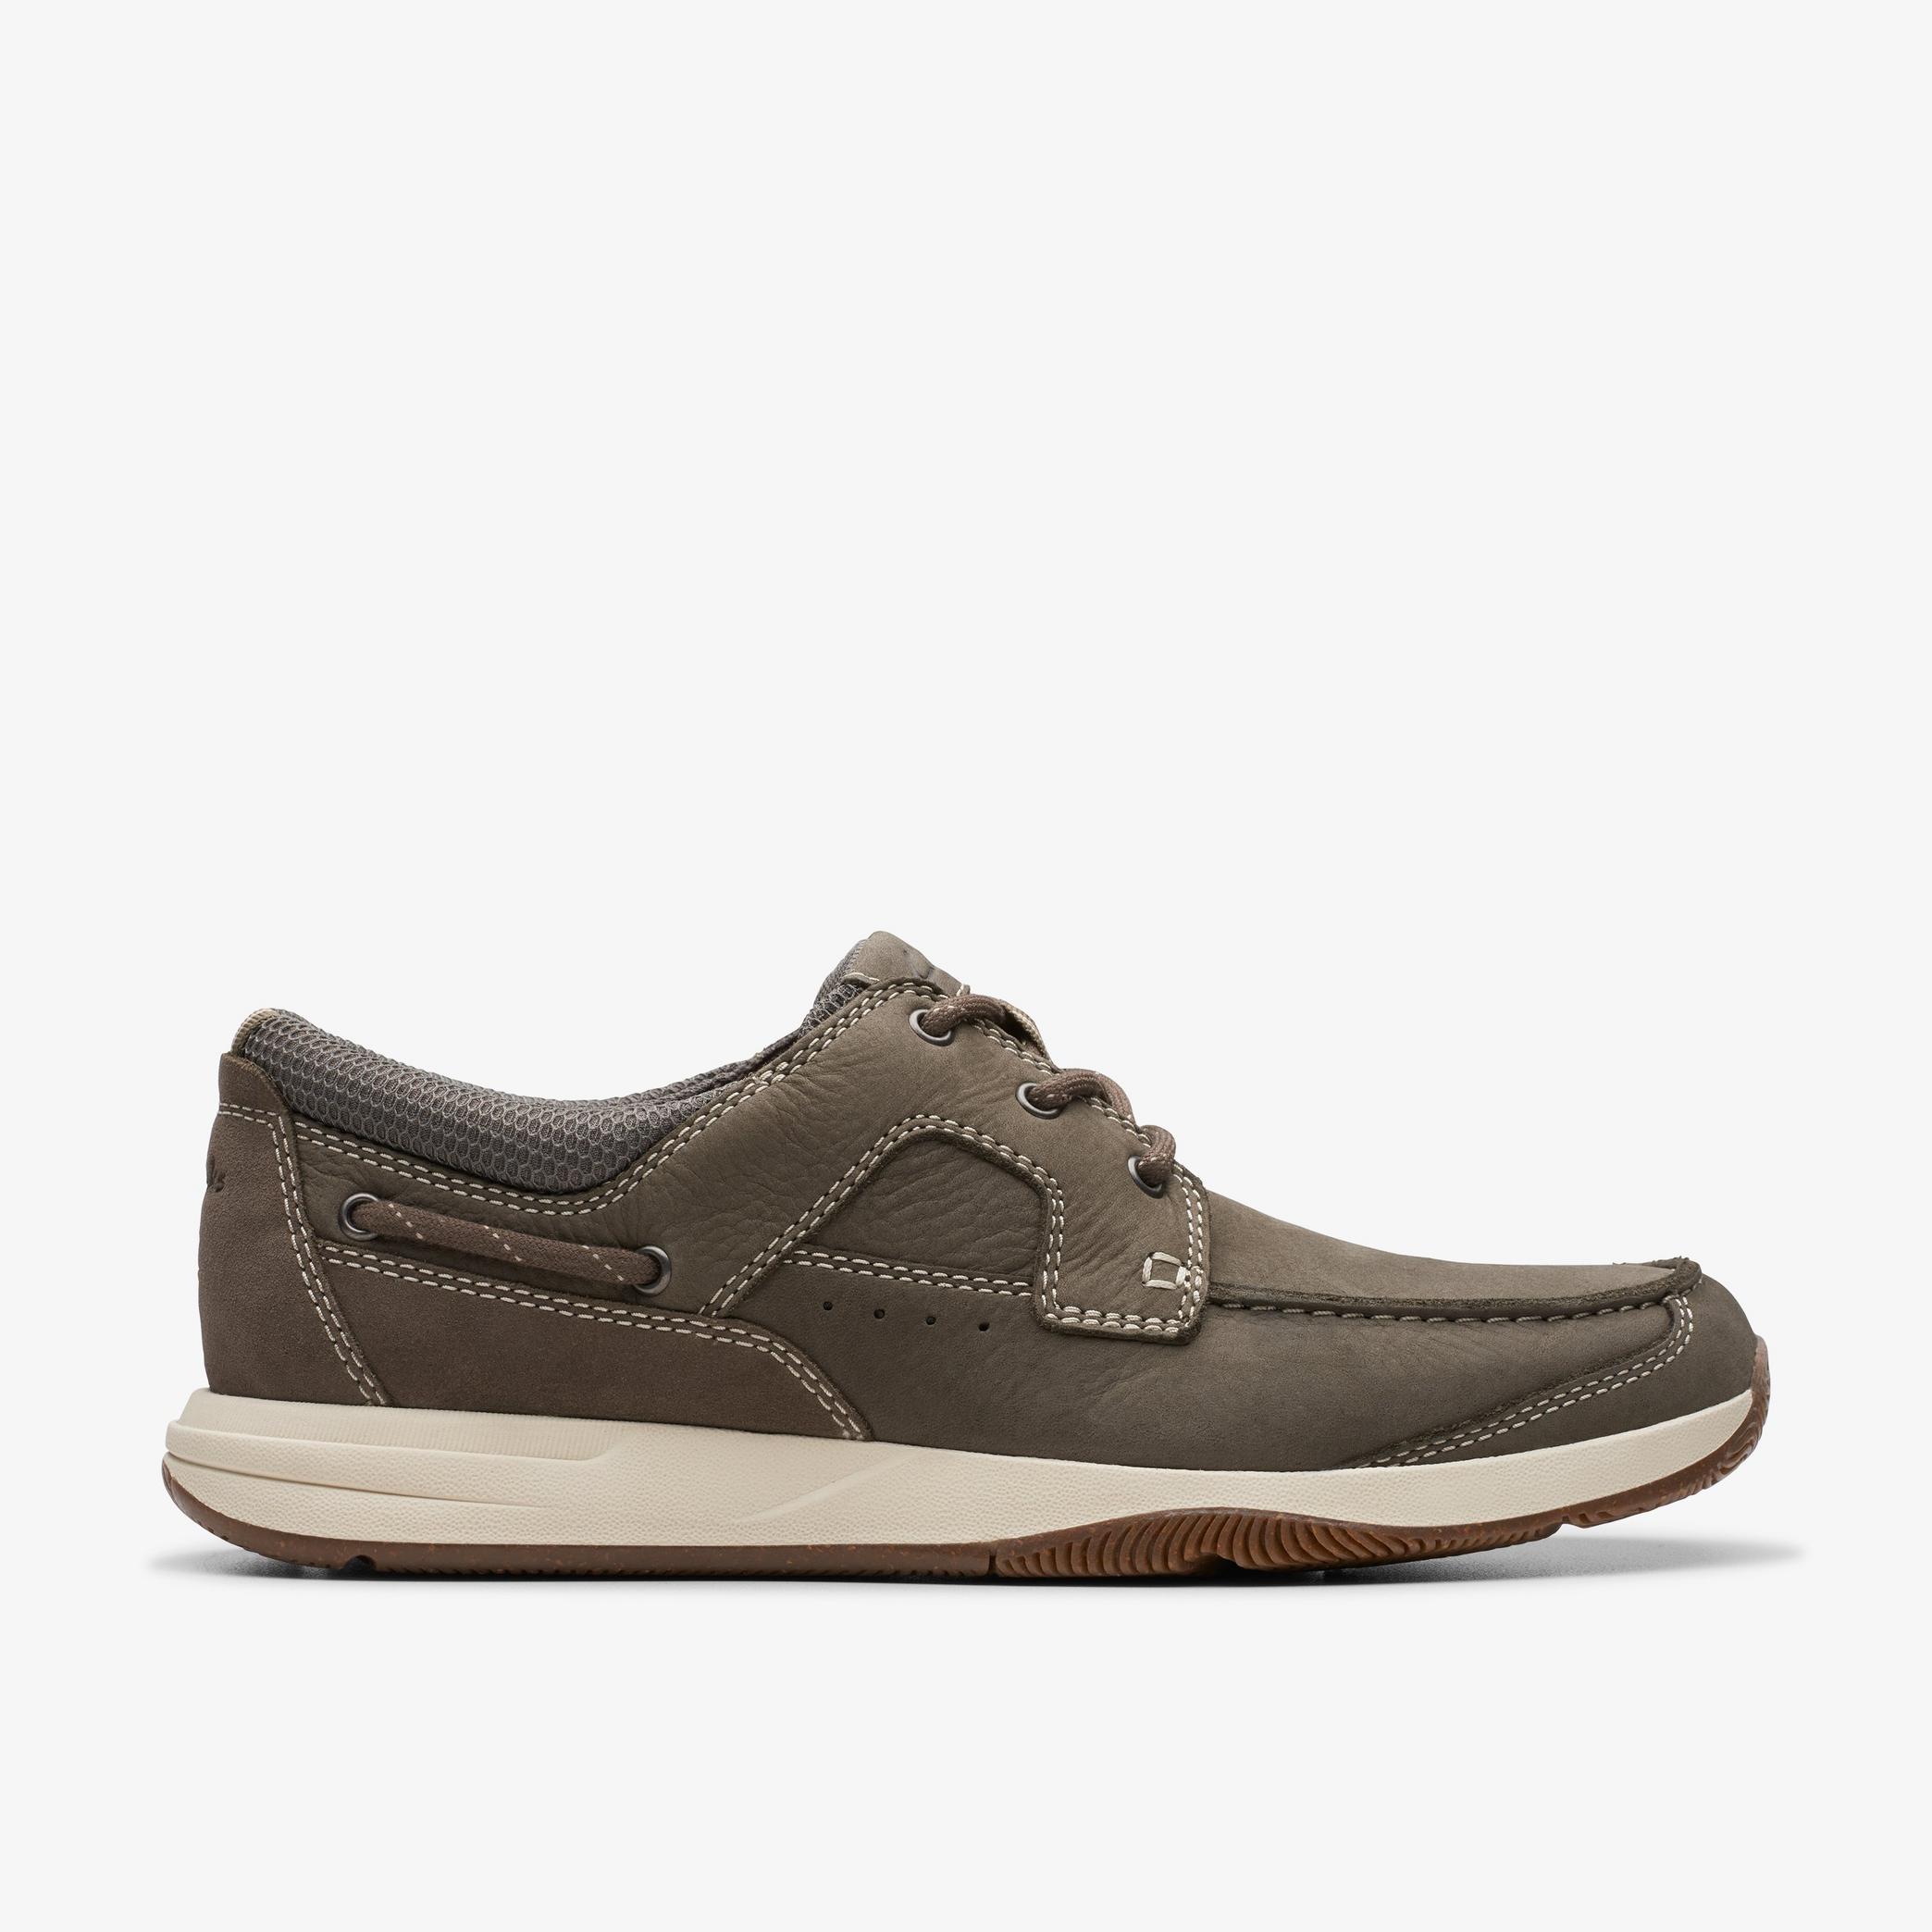 Sailview Lace Taupe Nubuck Boat Shoes, view 1 of 6